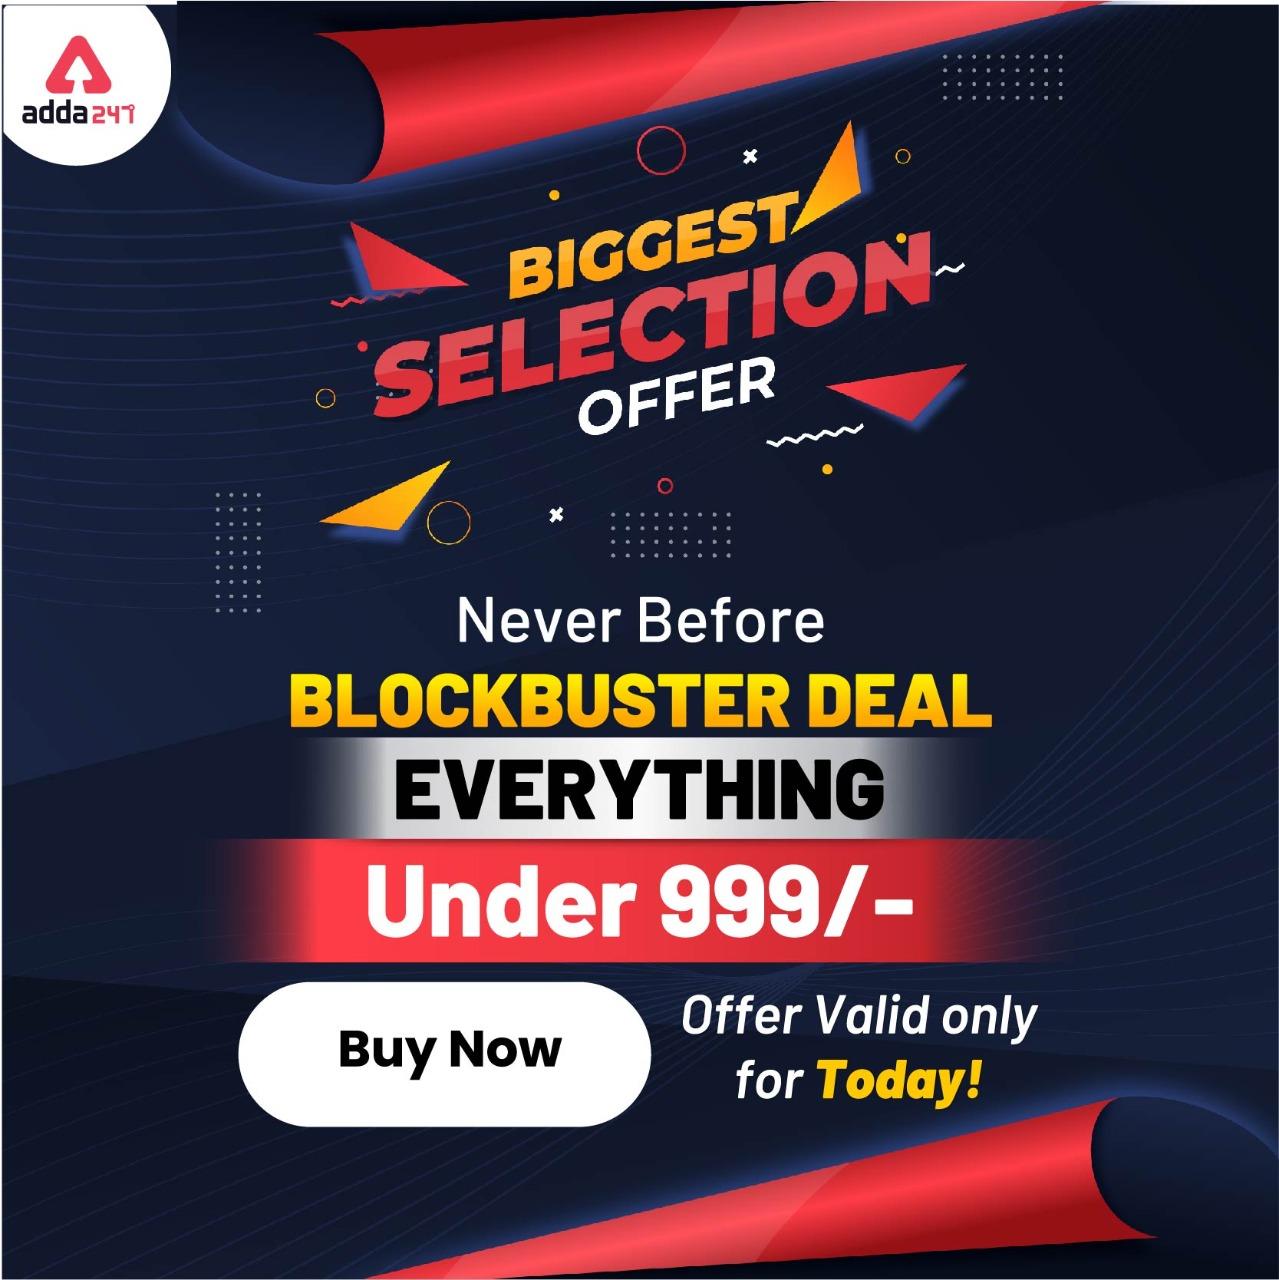 Biggest Selection Offer by Adda247 on Test Series [Just 999/-]_30.1